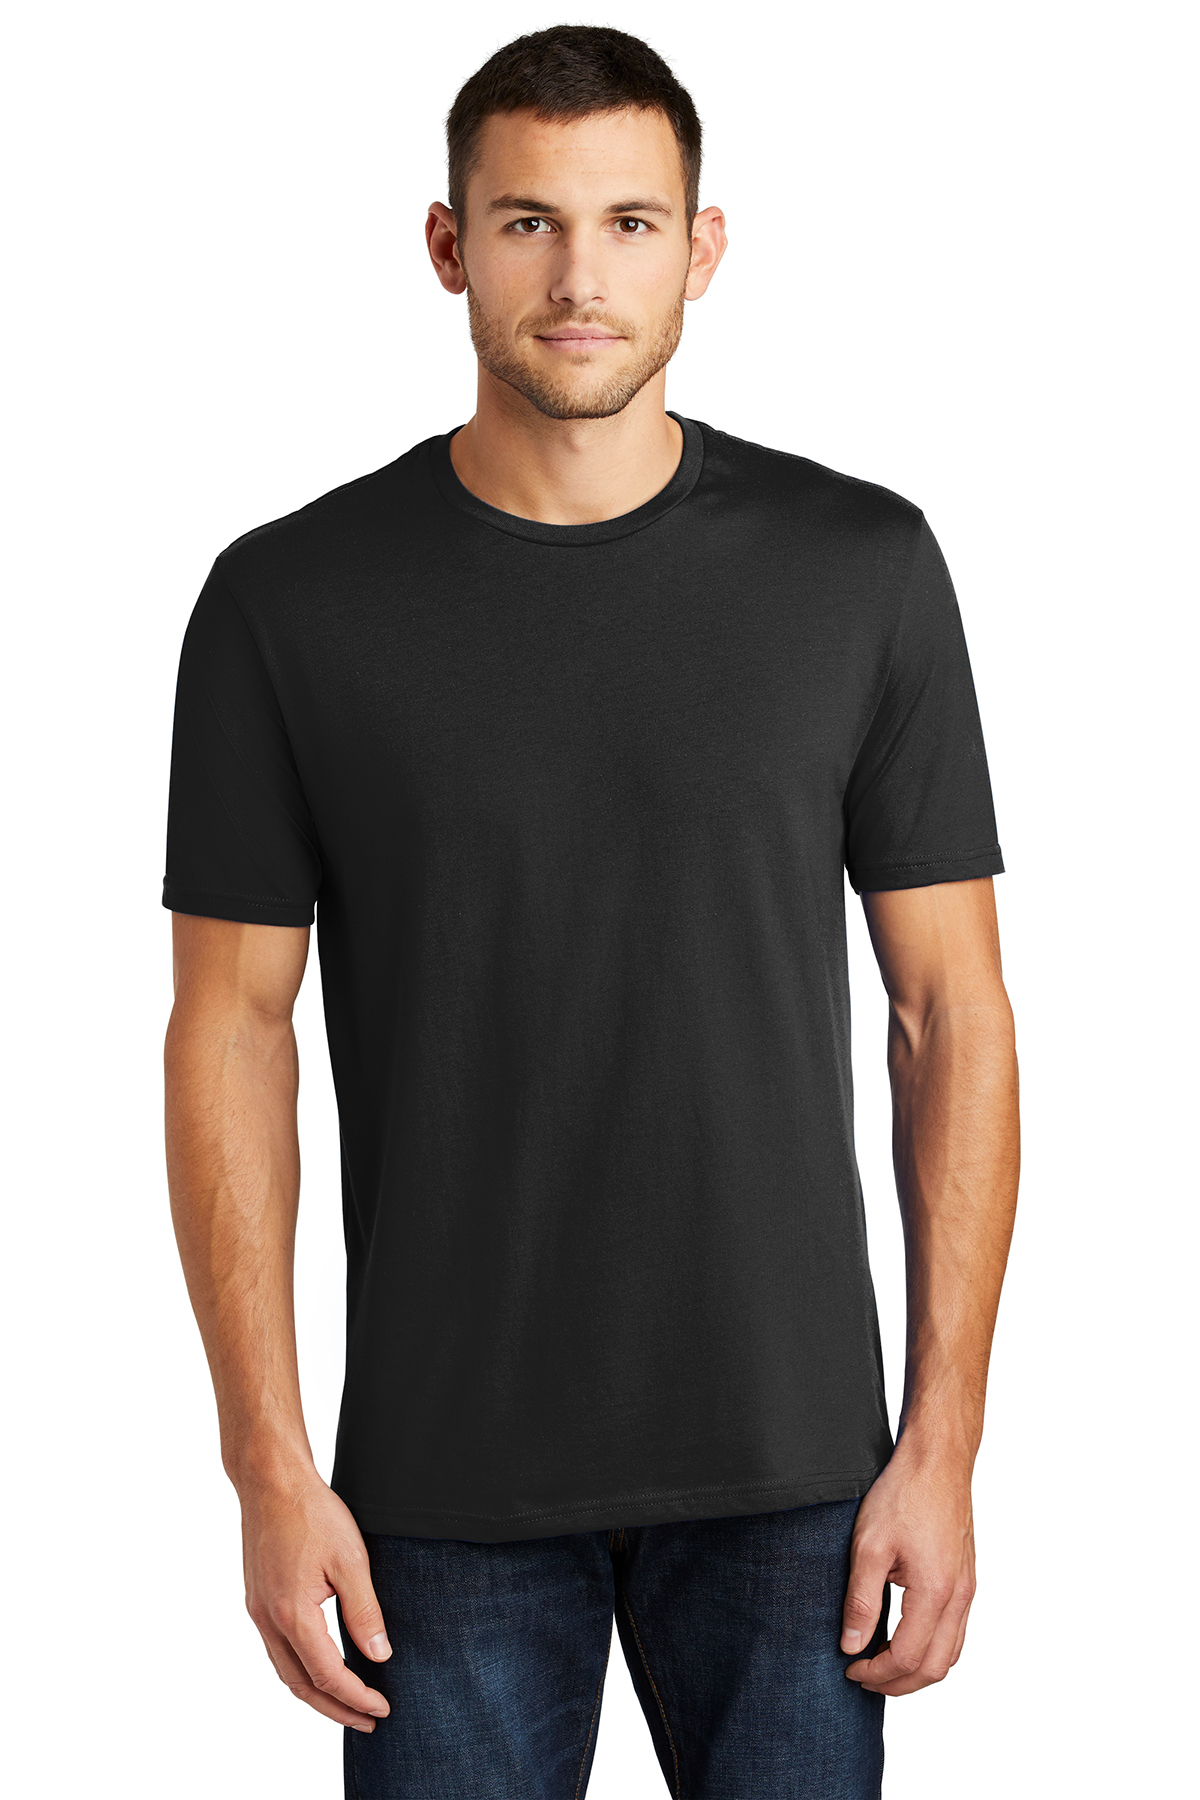 District Perfect Weight Tee | Product | District